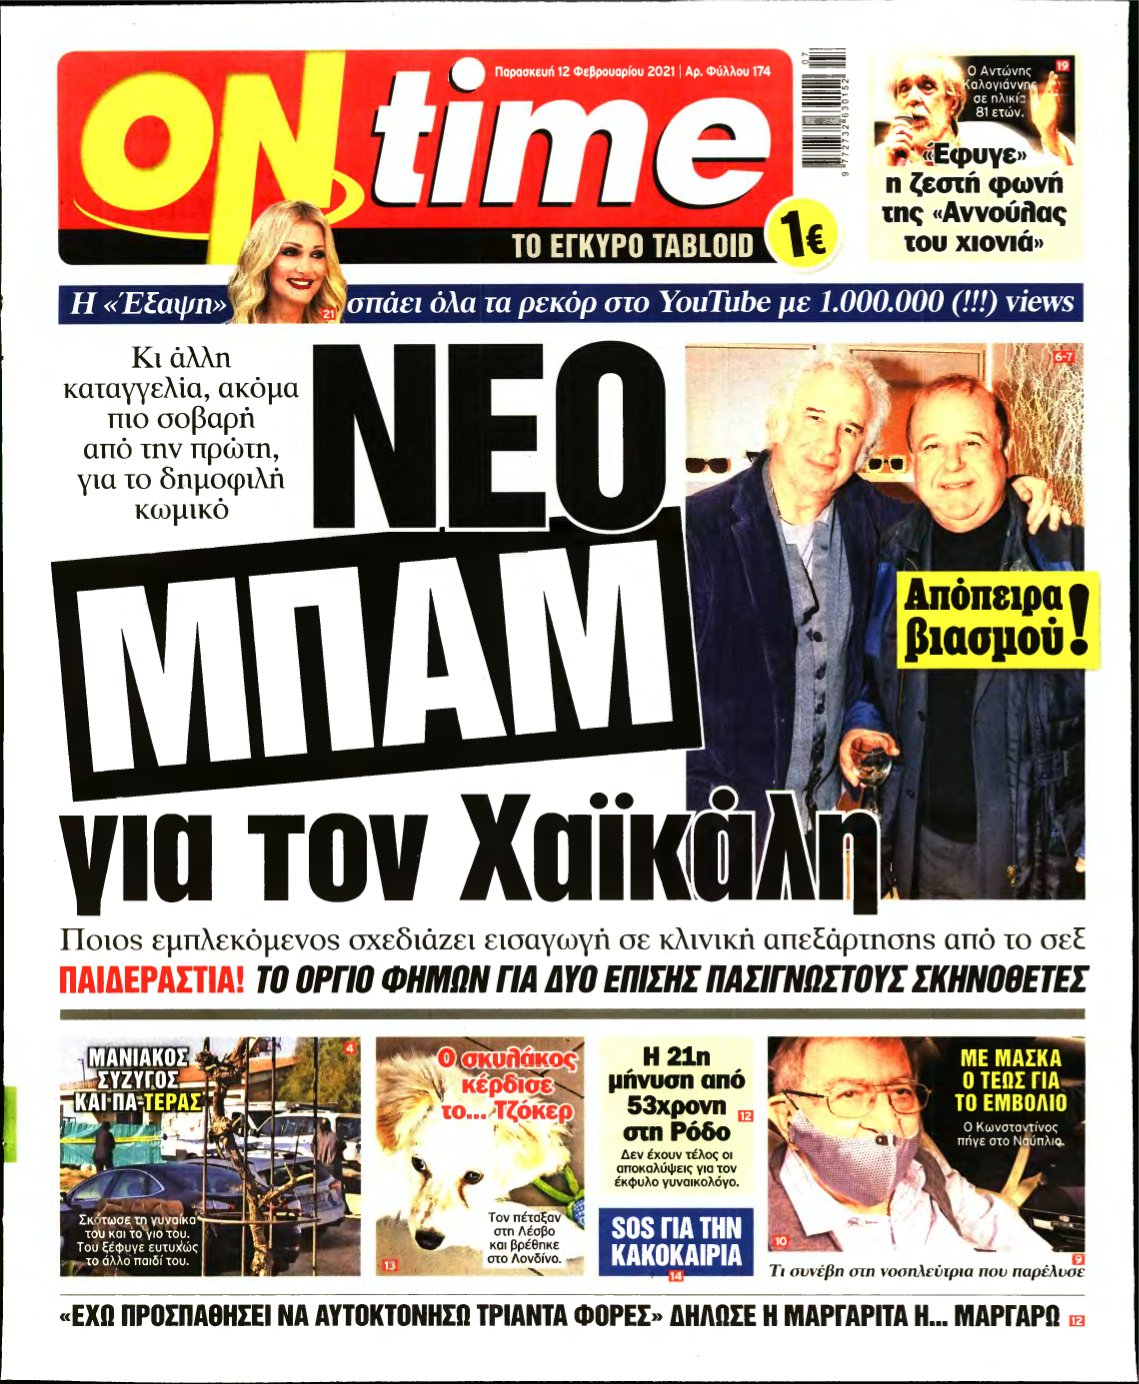 ON TIME – 12/02/2021